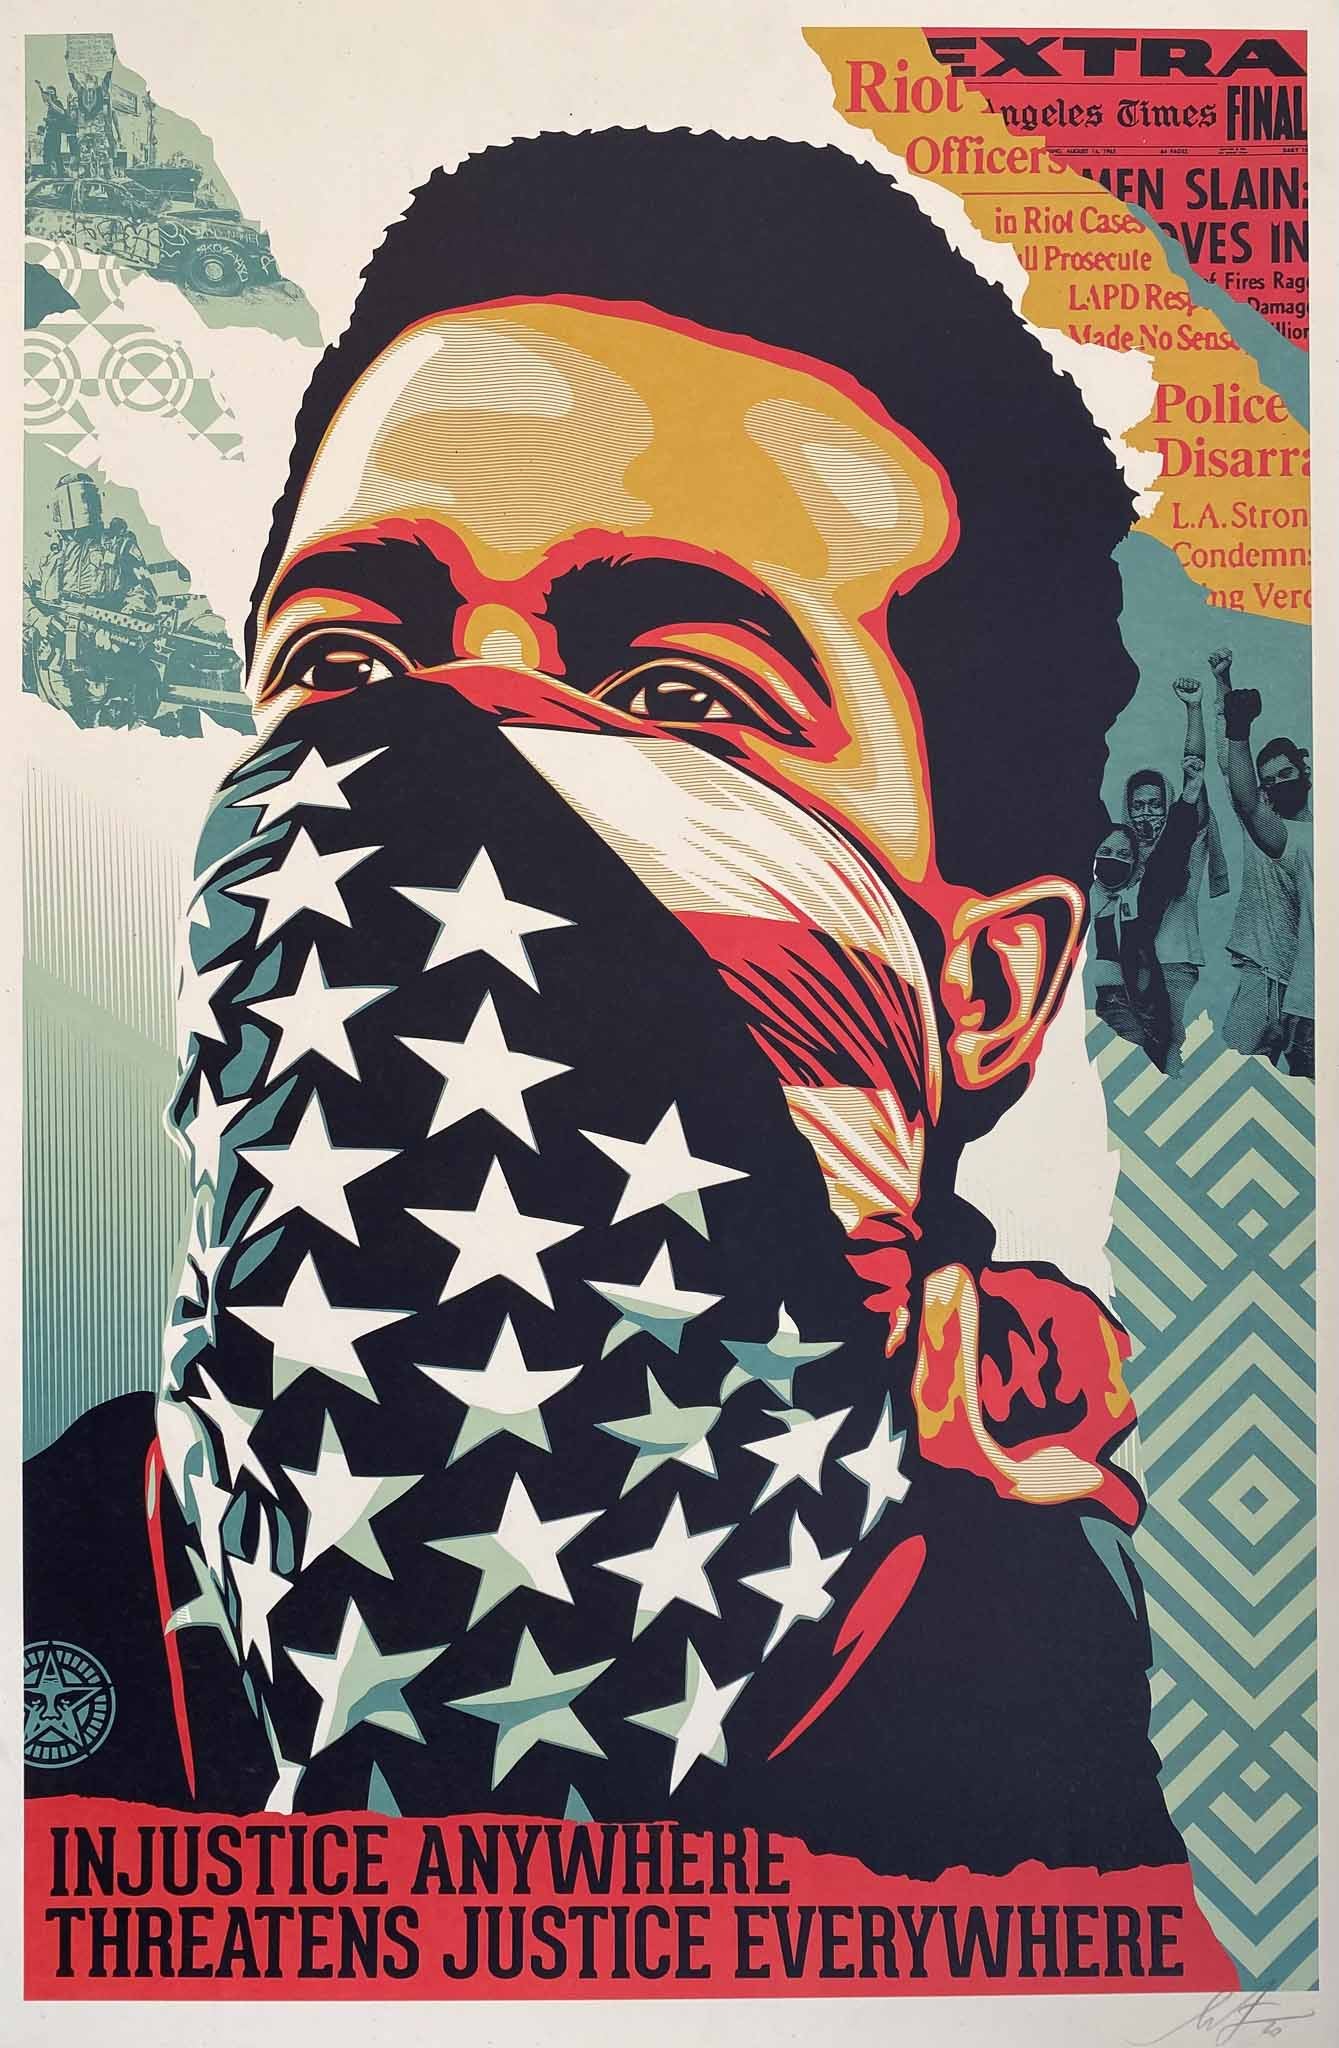 Affiche Injustice Anywhere Treatens Justice Everywhere par Shepard Fairey (Obey), 2016